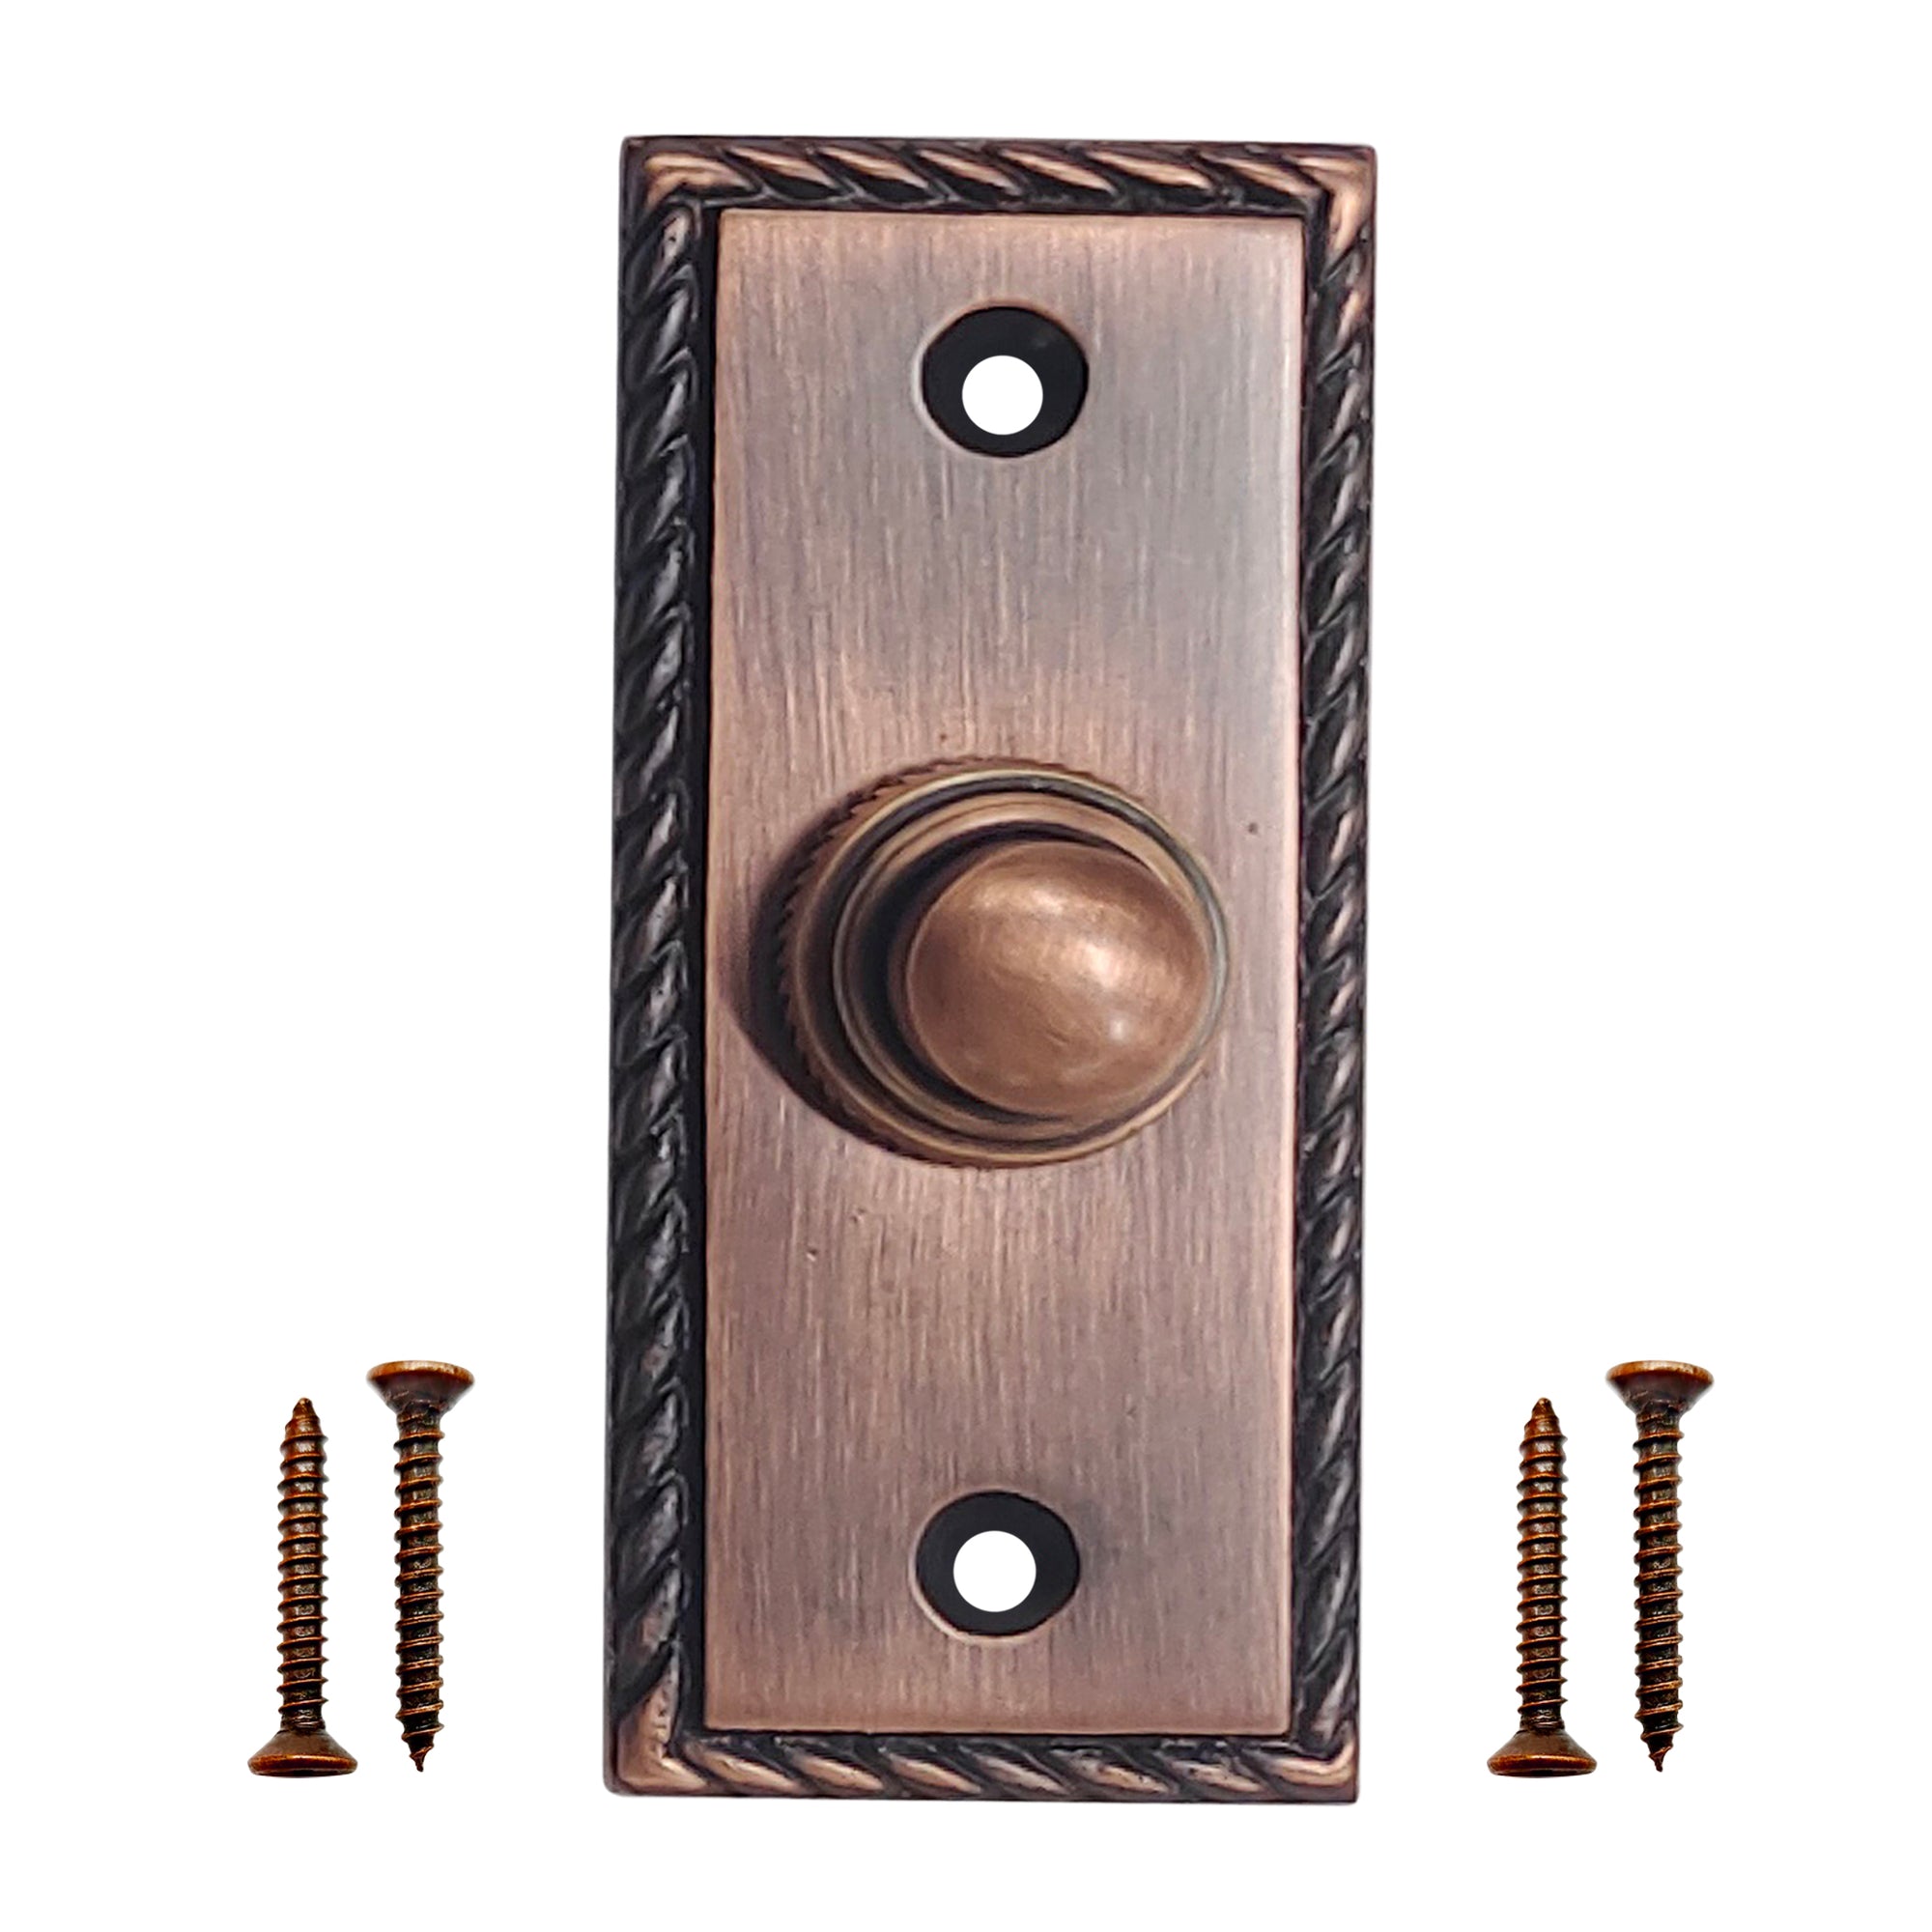 Wired Brass Doorbell Chime Push Button In Oil Rubbed Bronze Finish, Vintage Decorative  Door Bell With Easy Installation, 2 9/16 X 1 3/16 In on Galleon Philippines